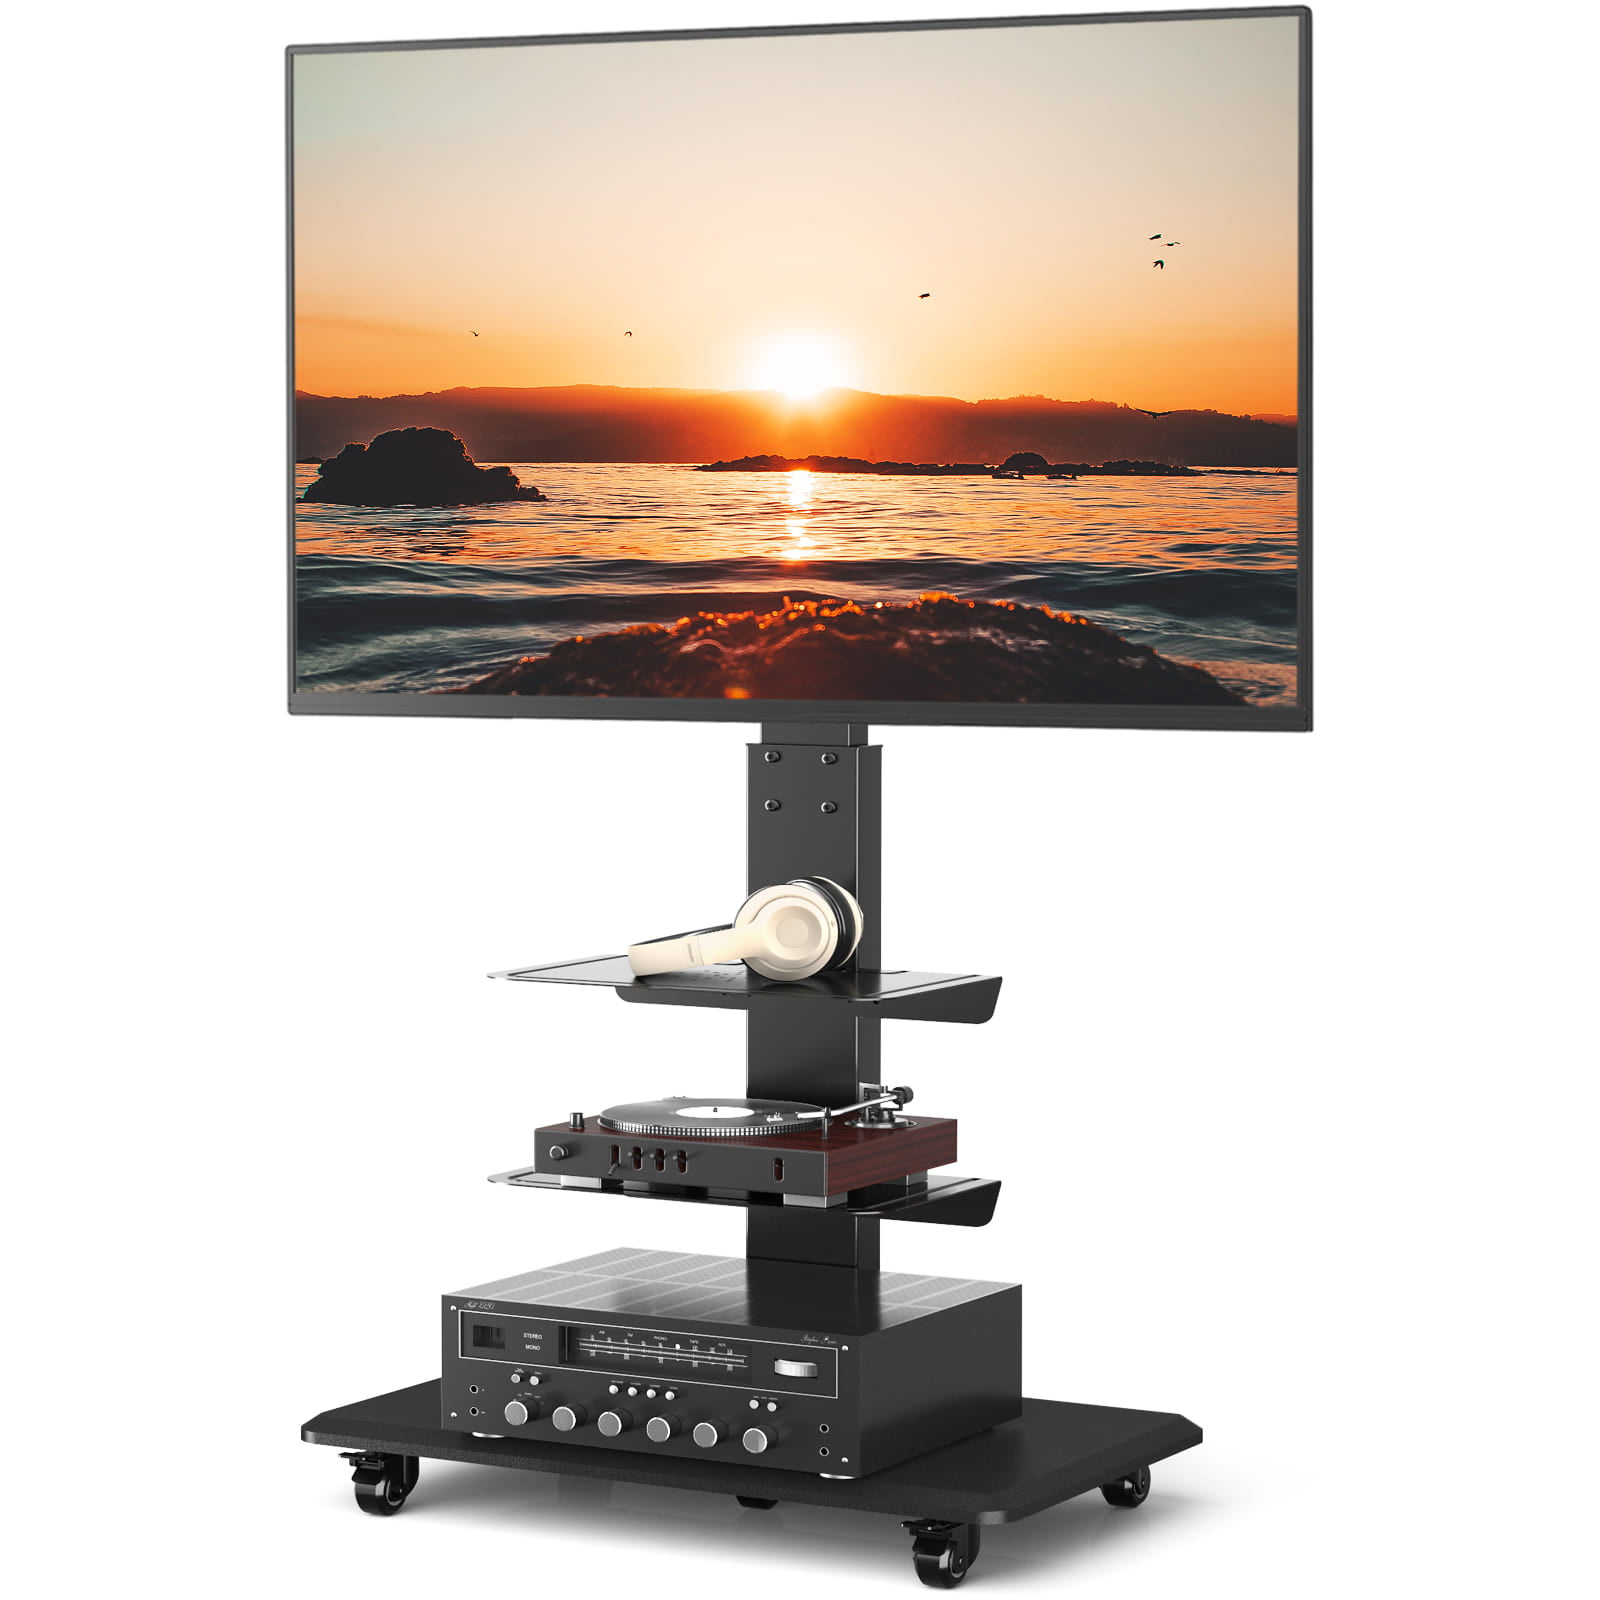 Swivel Floor TV Stand with Mount for 32 37 42 47 50 55 60 65 inch LCD LED Bj 